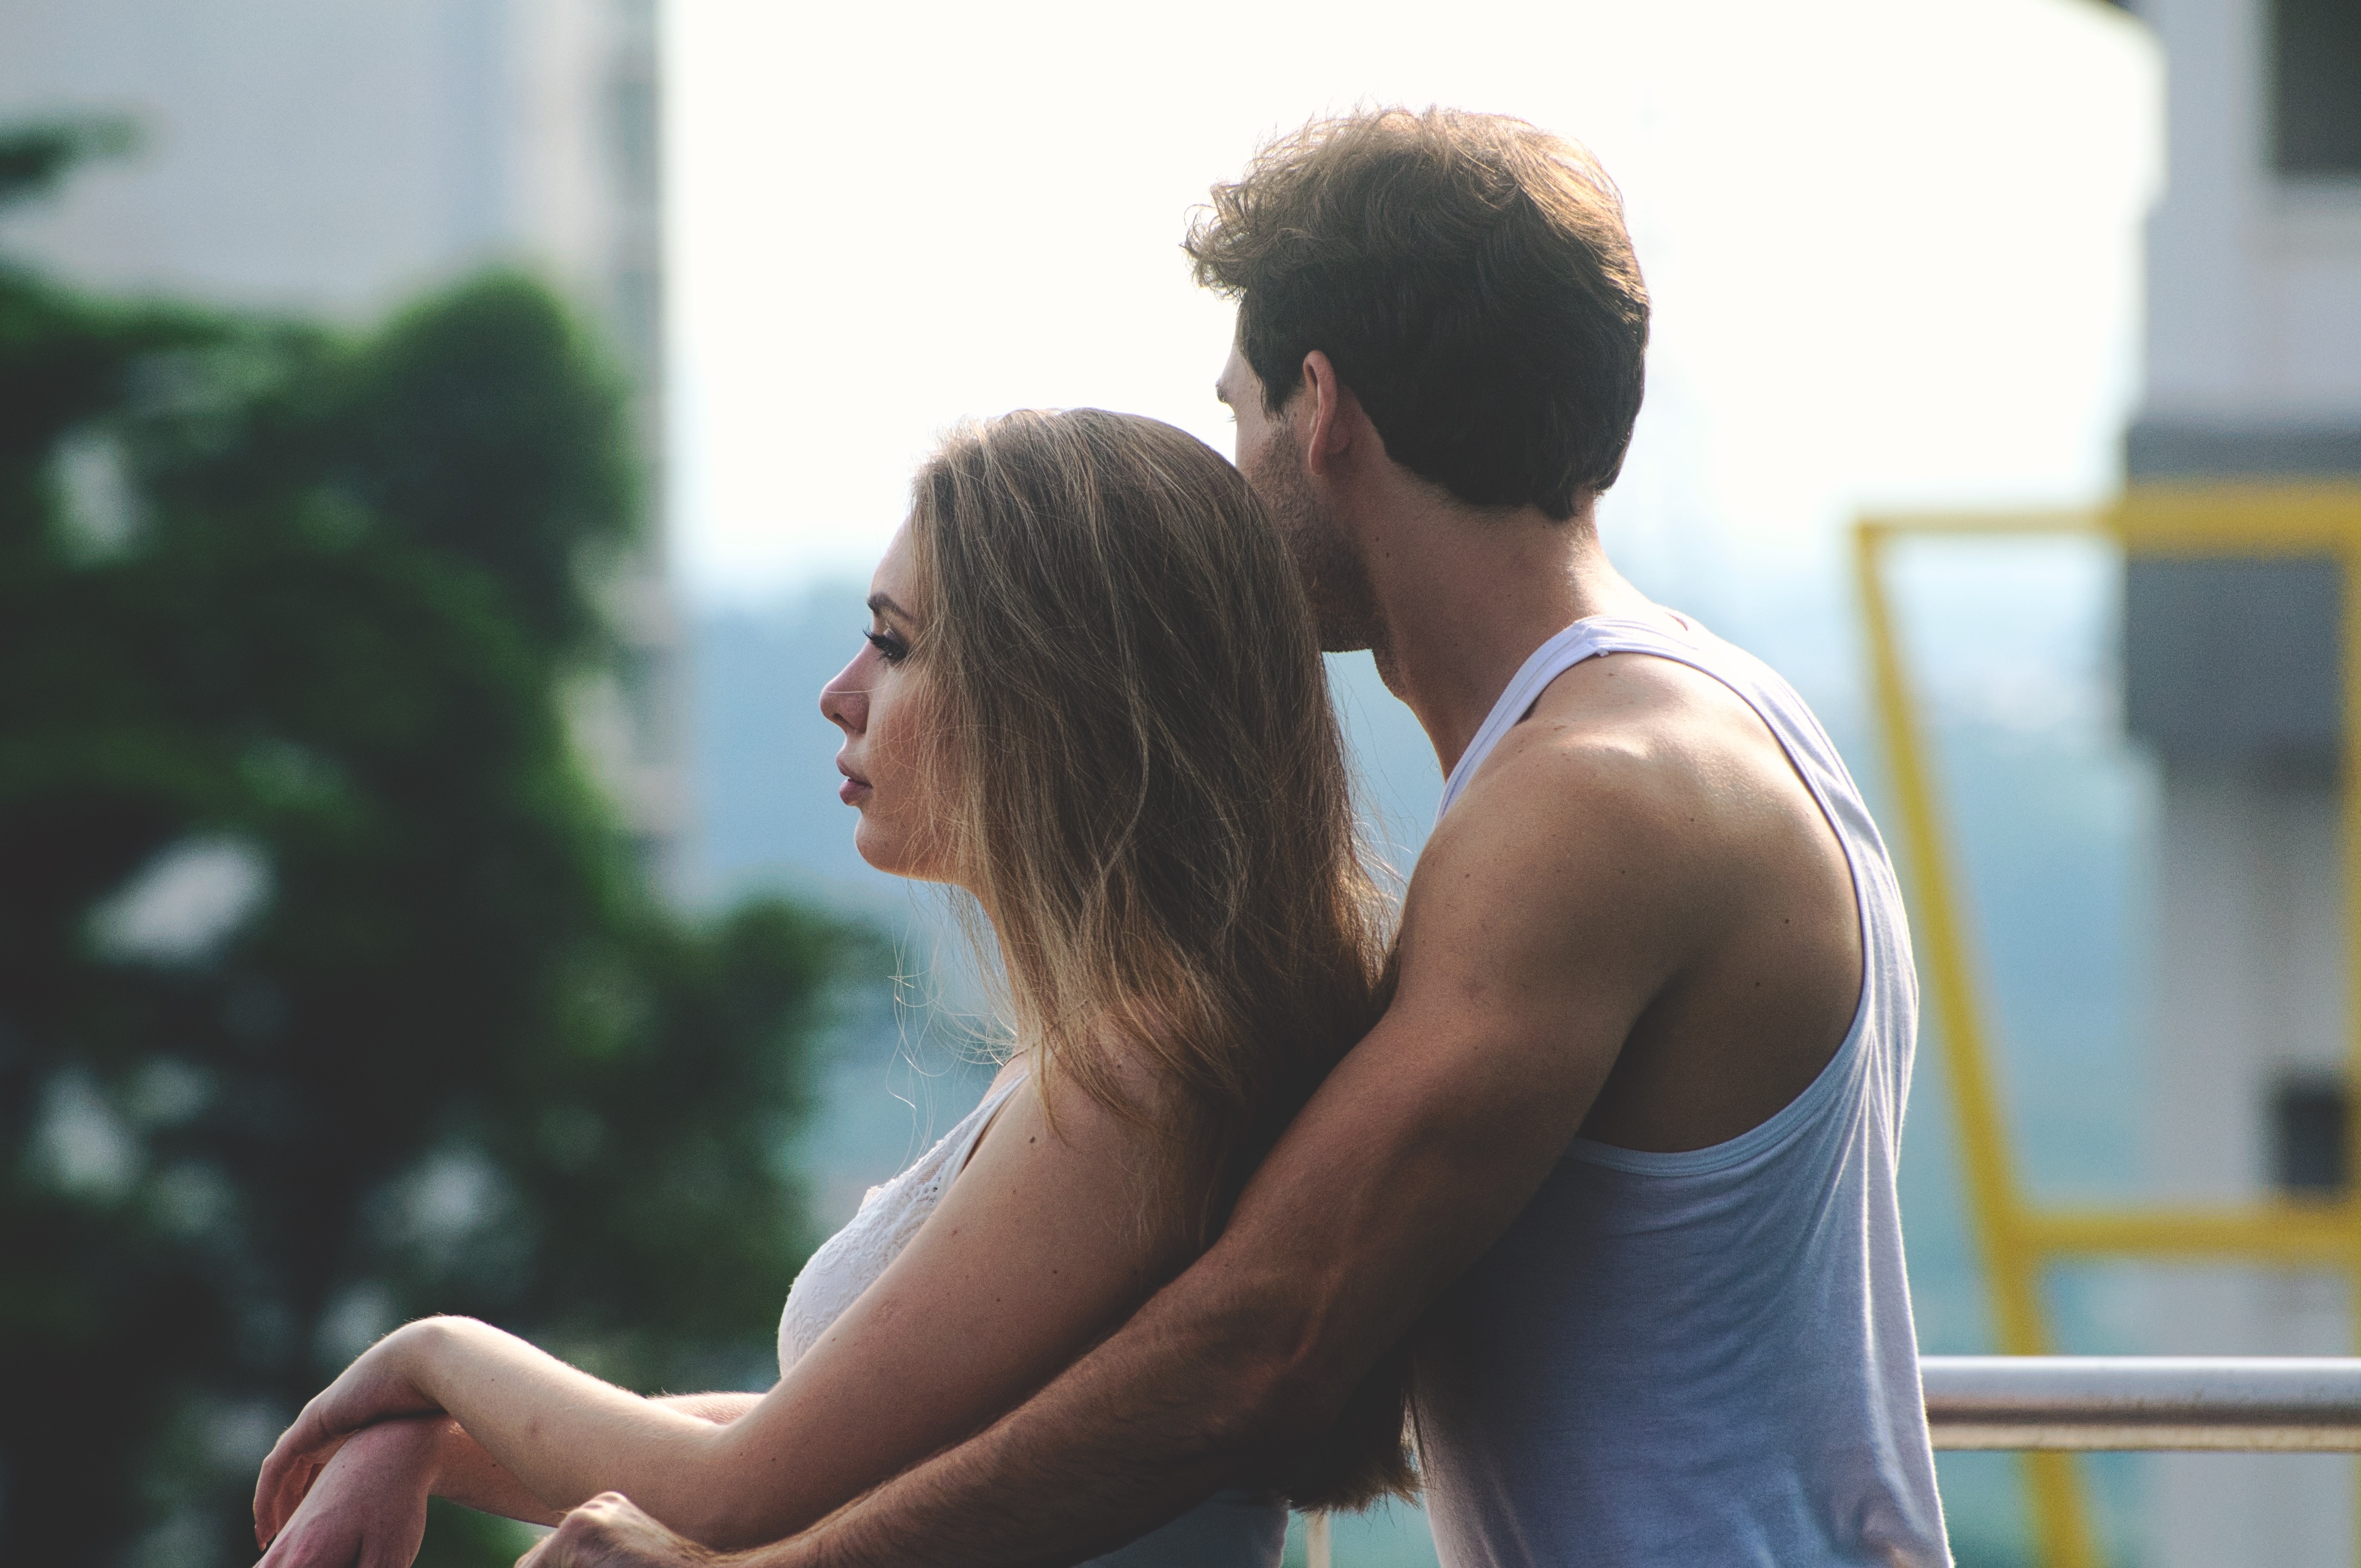 A couple standing on a balcony. | Source: Unsplash